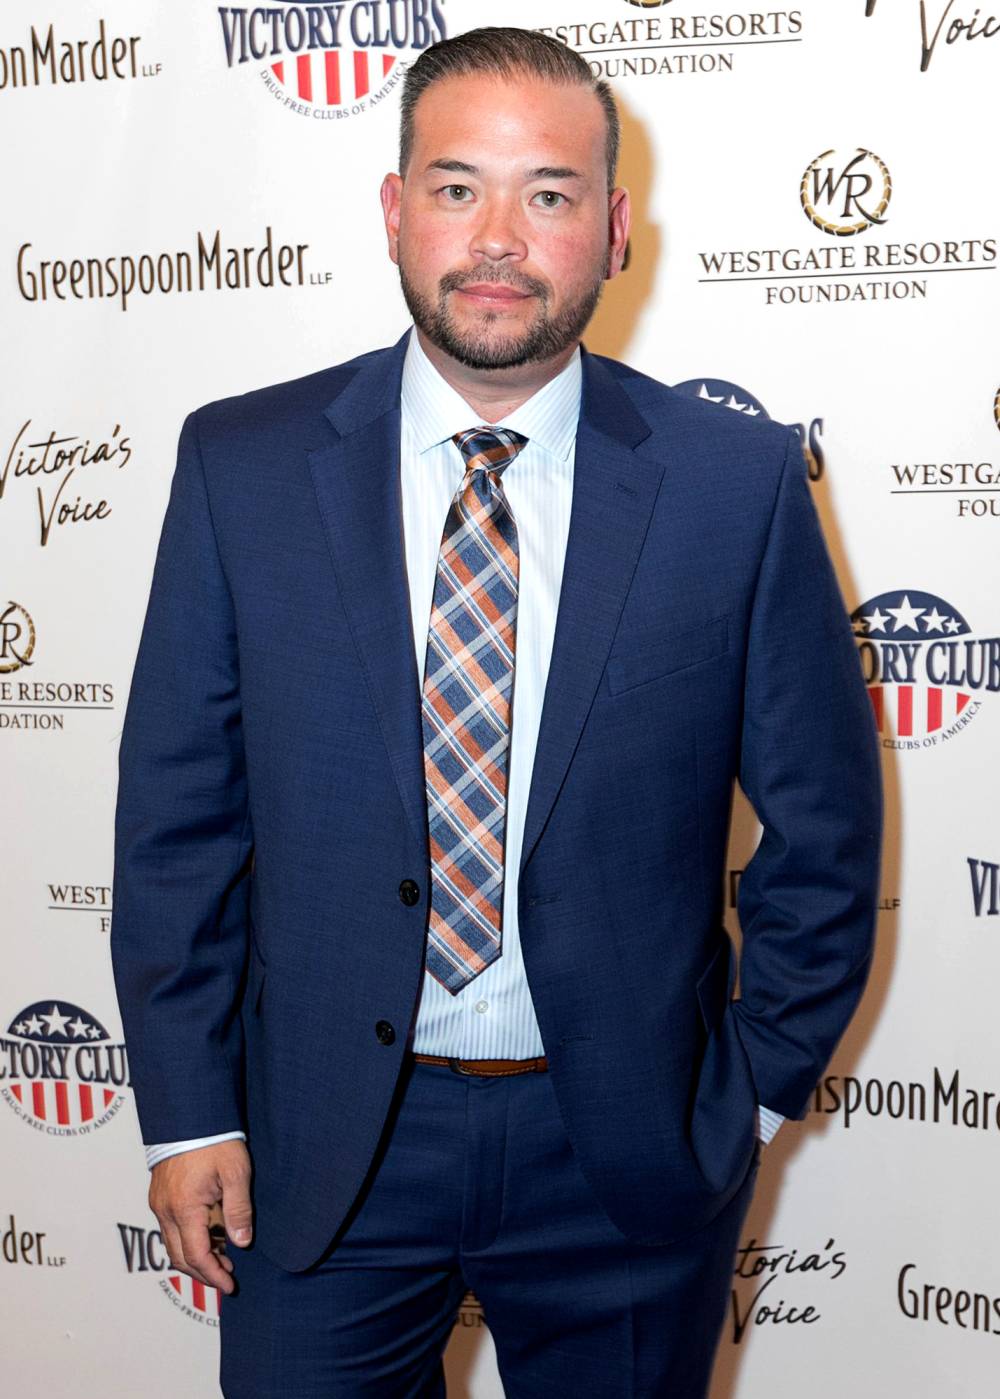 Jon Gosselin Is Hospitalized After Venomous Spider Bite Left Him in 'Excruciating Pain'